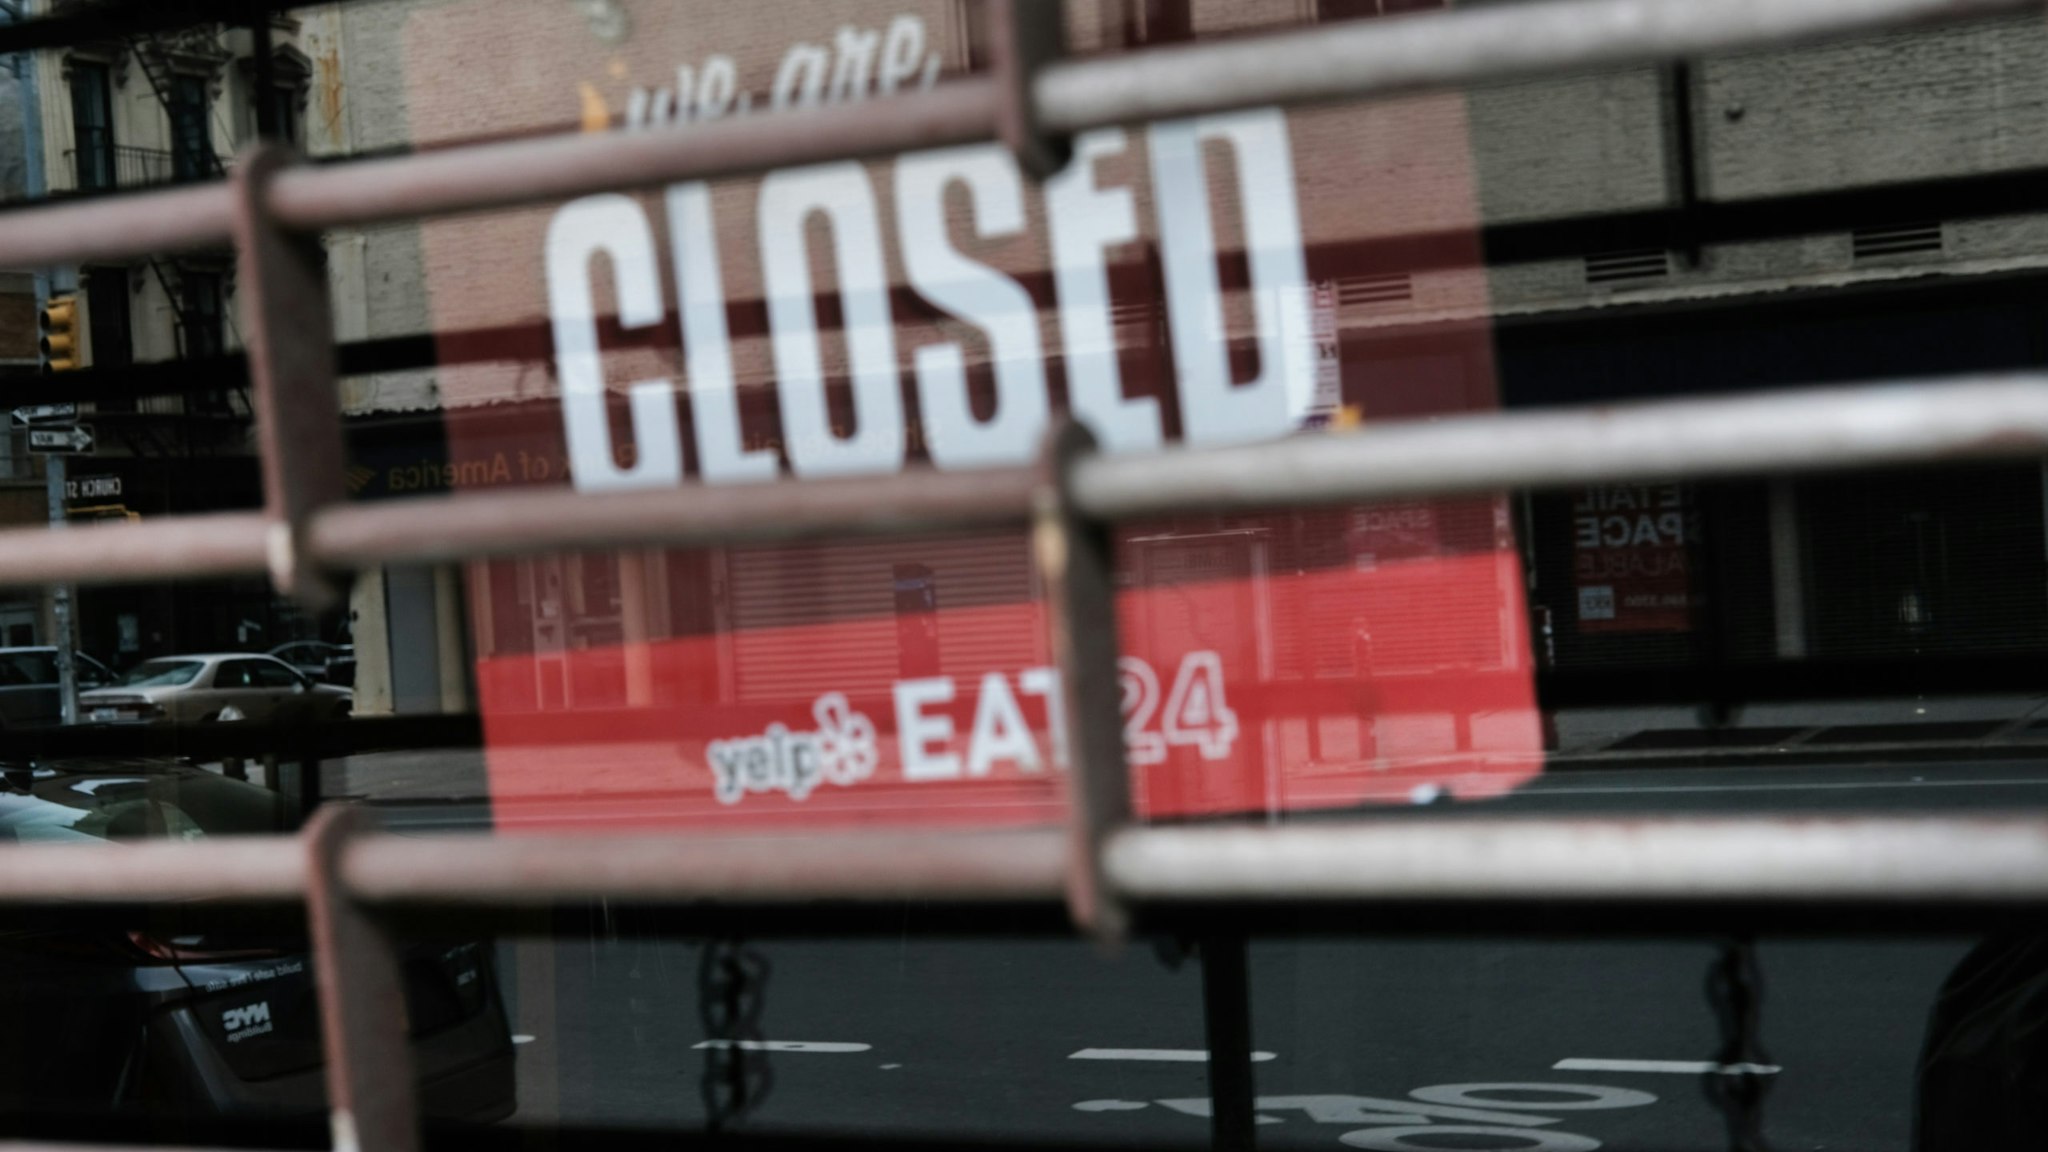 NEW YORK CITY - APRIL 17: A closed sign is displayed in the window of a business in a nearly deserted lower Manhattan on April 17, 2020 in New York City, United States. New York City has been the hardest hit city in America from COVIT-19, with overwhelmed hospitals and a struggling economy.